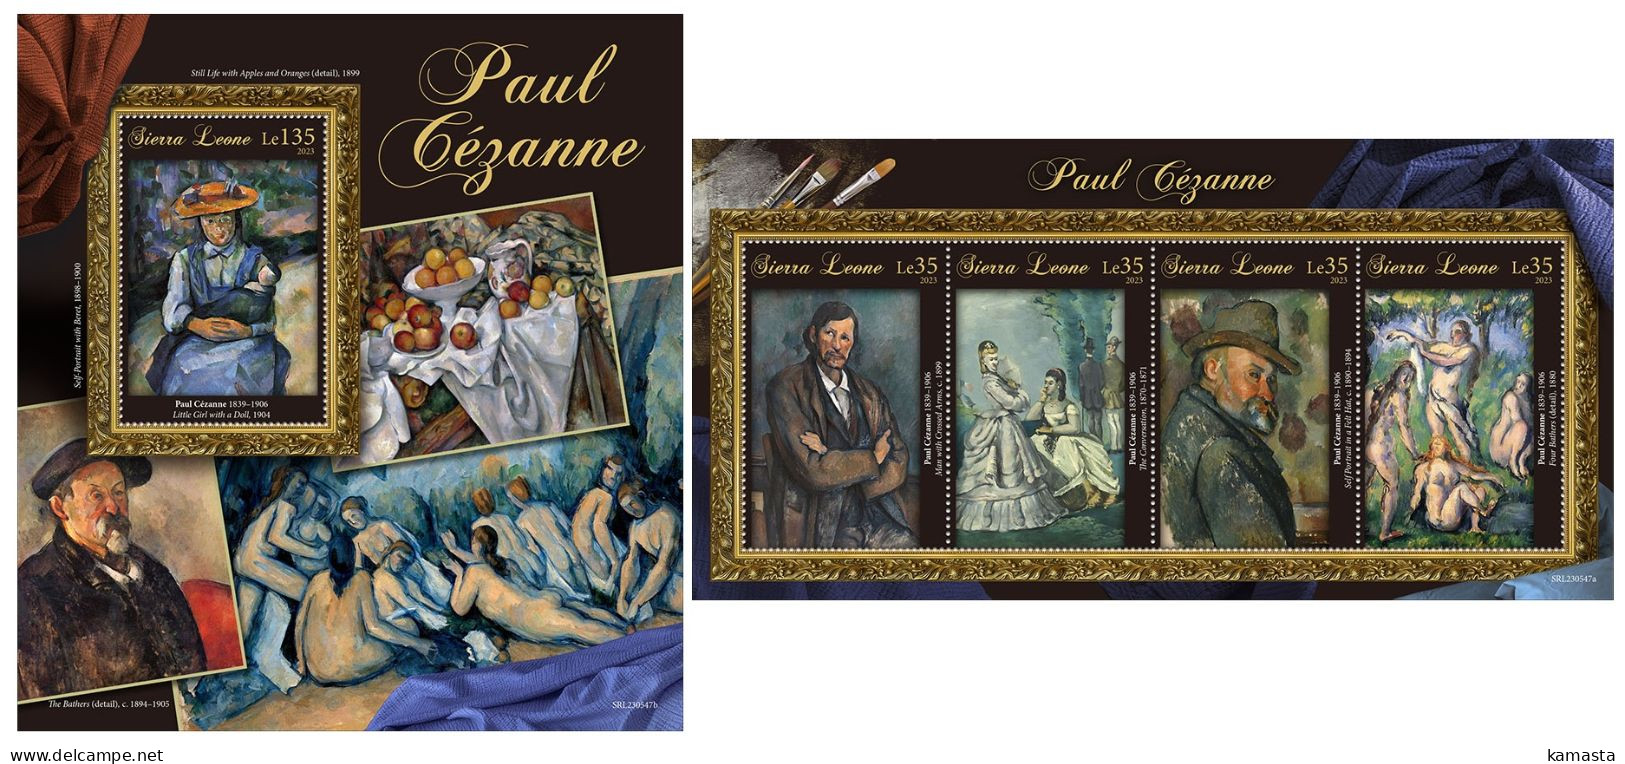 Sierra Leone 2023 Paul Cézanne. (547) OFFICIAL ISSUE - Impressionisme